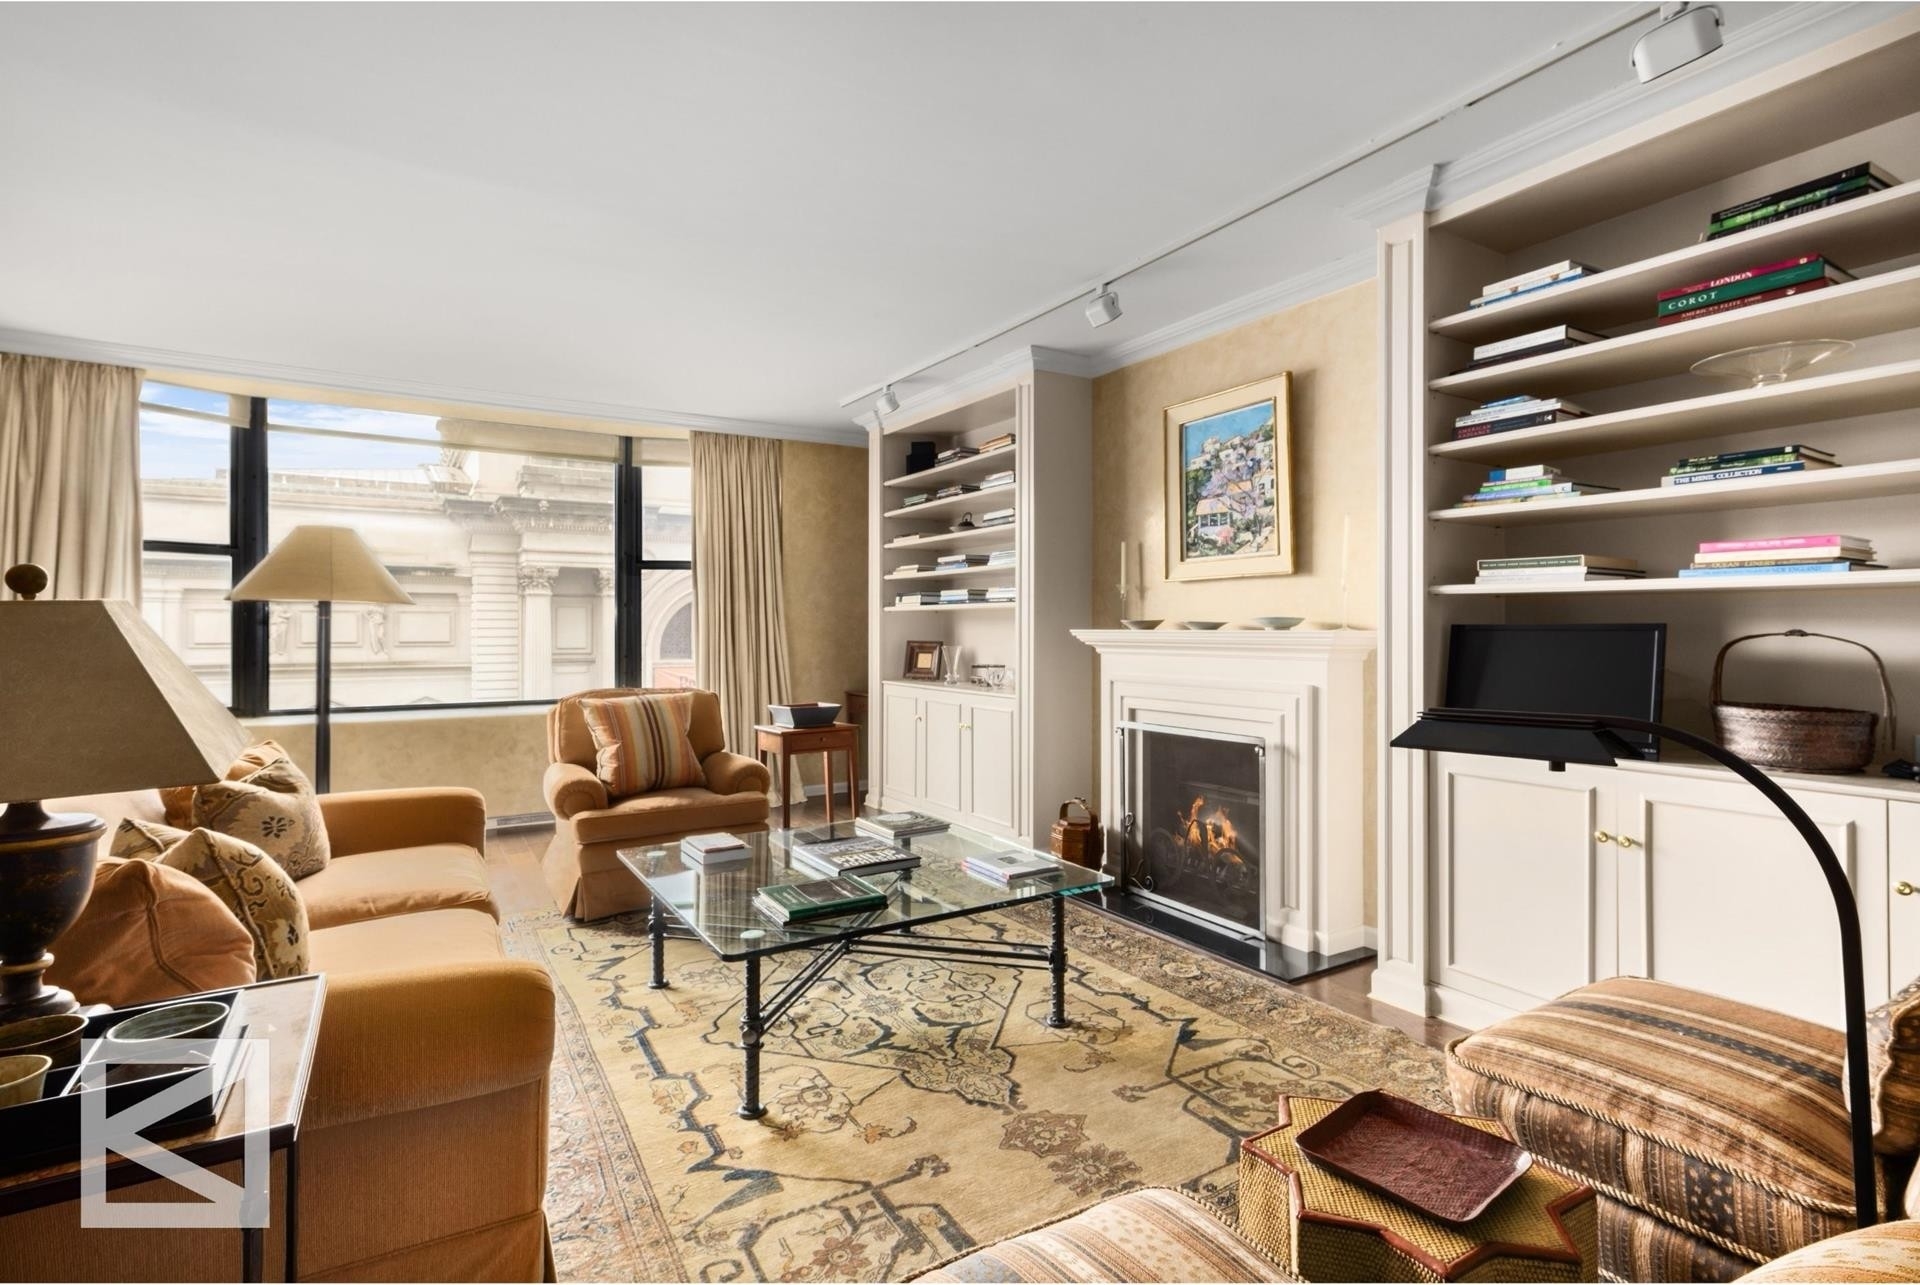 Property at 1001 FIFTH AVE, 6C New York